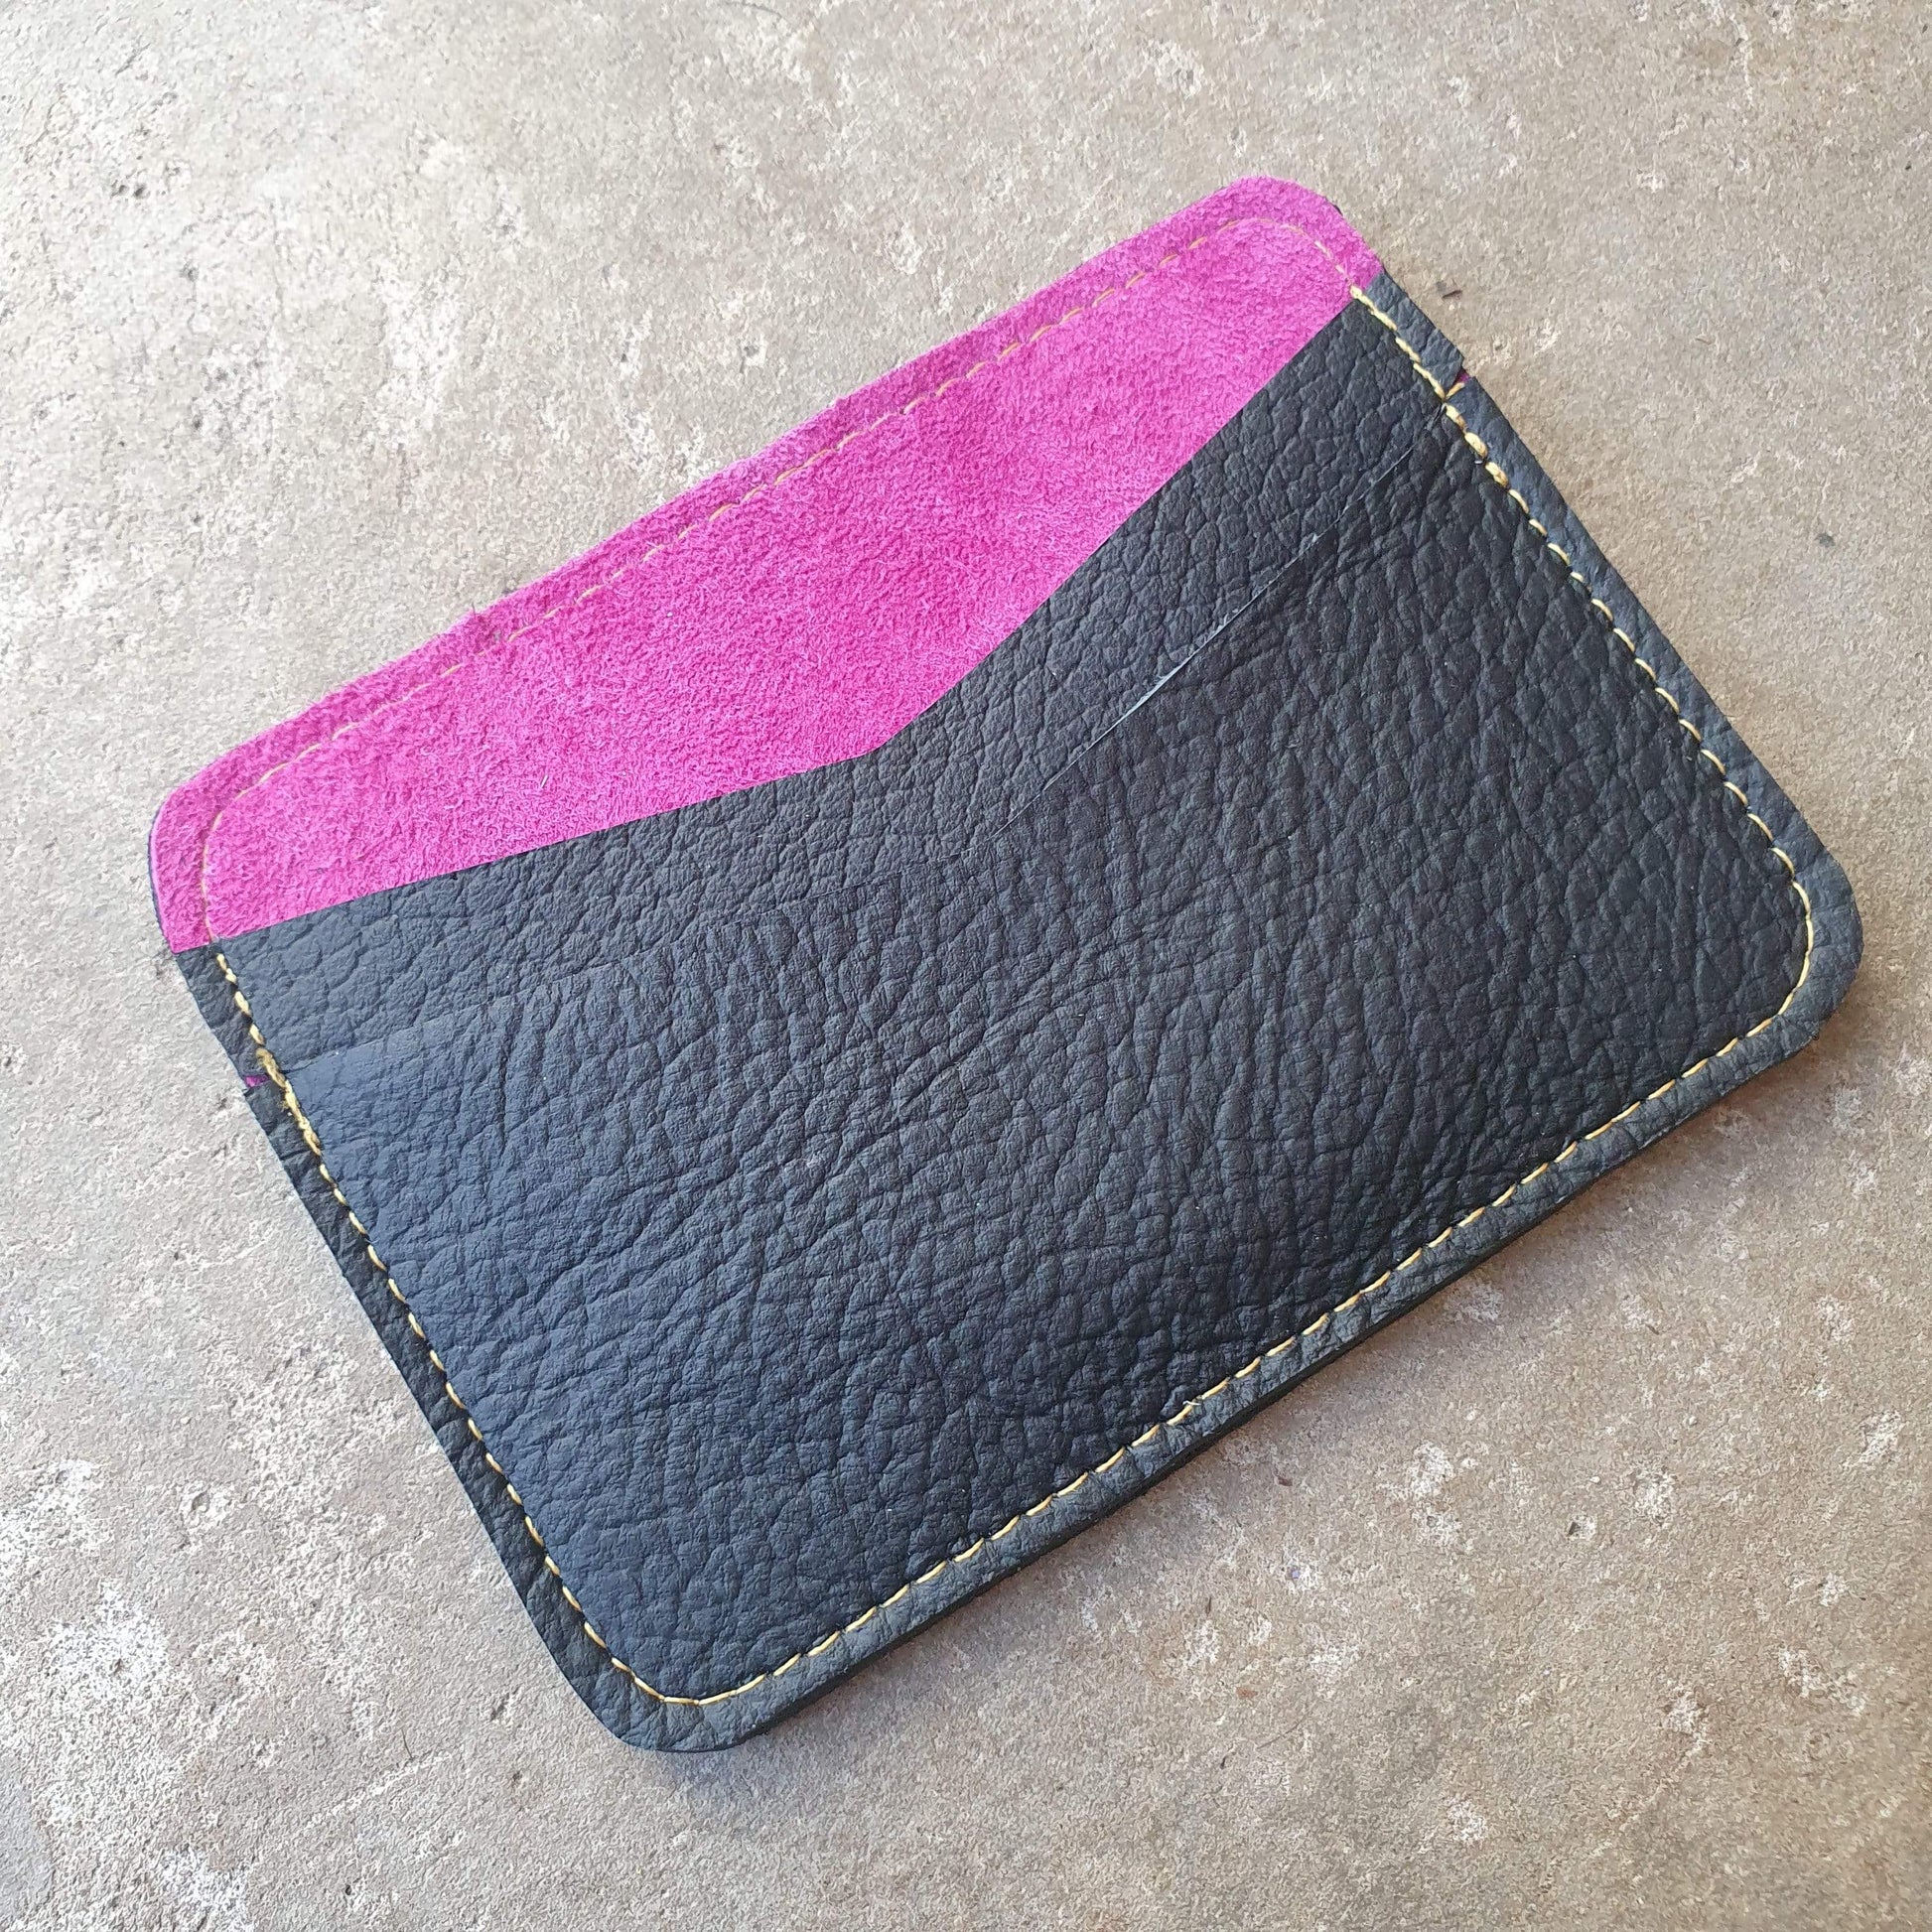 Zoe Dunn Designs Purse / Wallet Black / Fuschia Card Holder - Recycled Leather